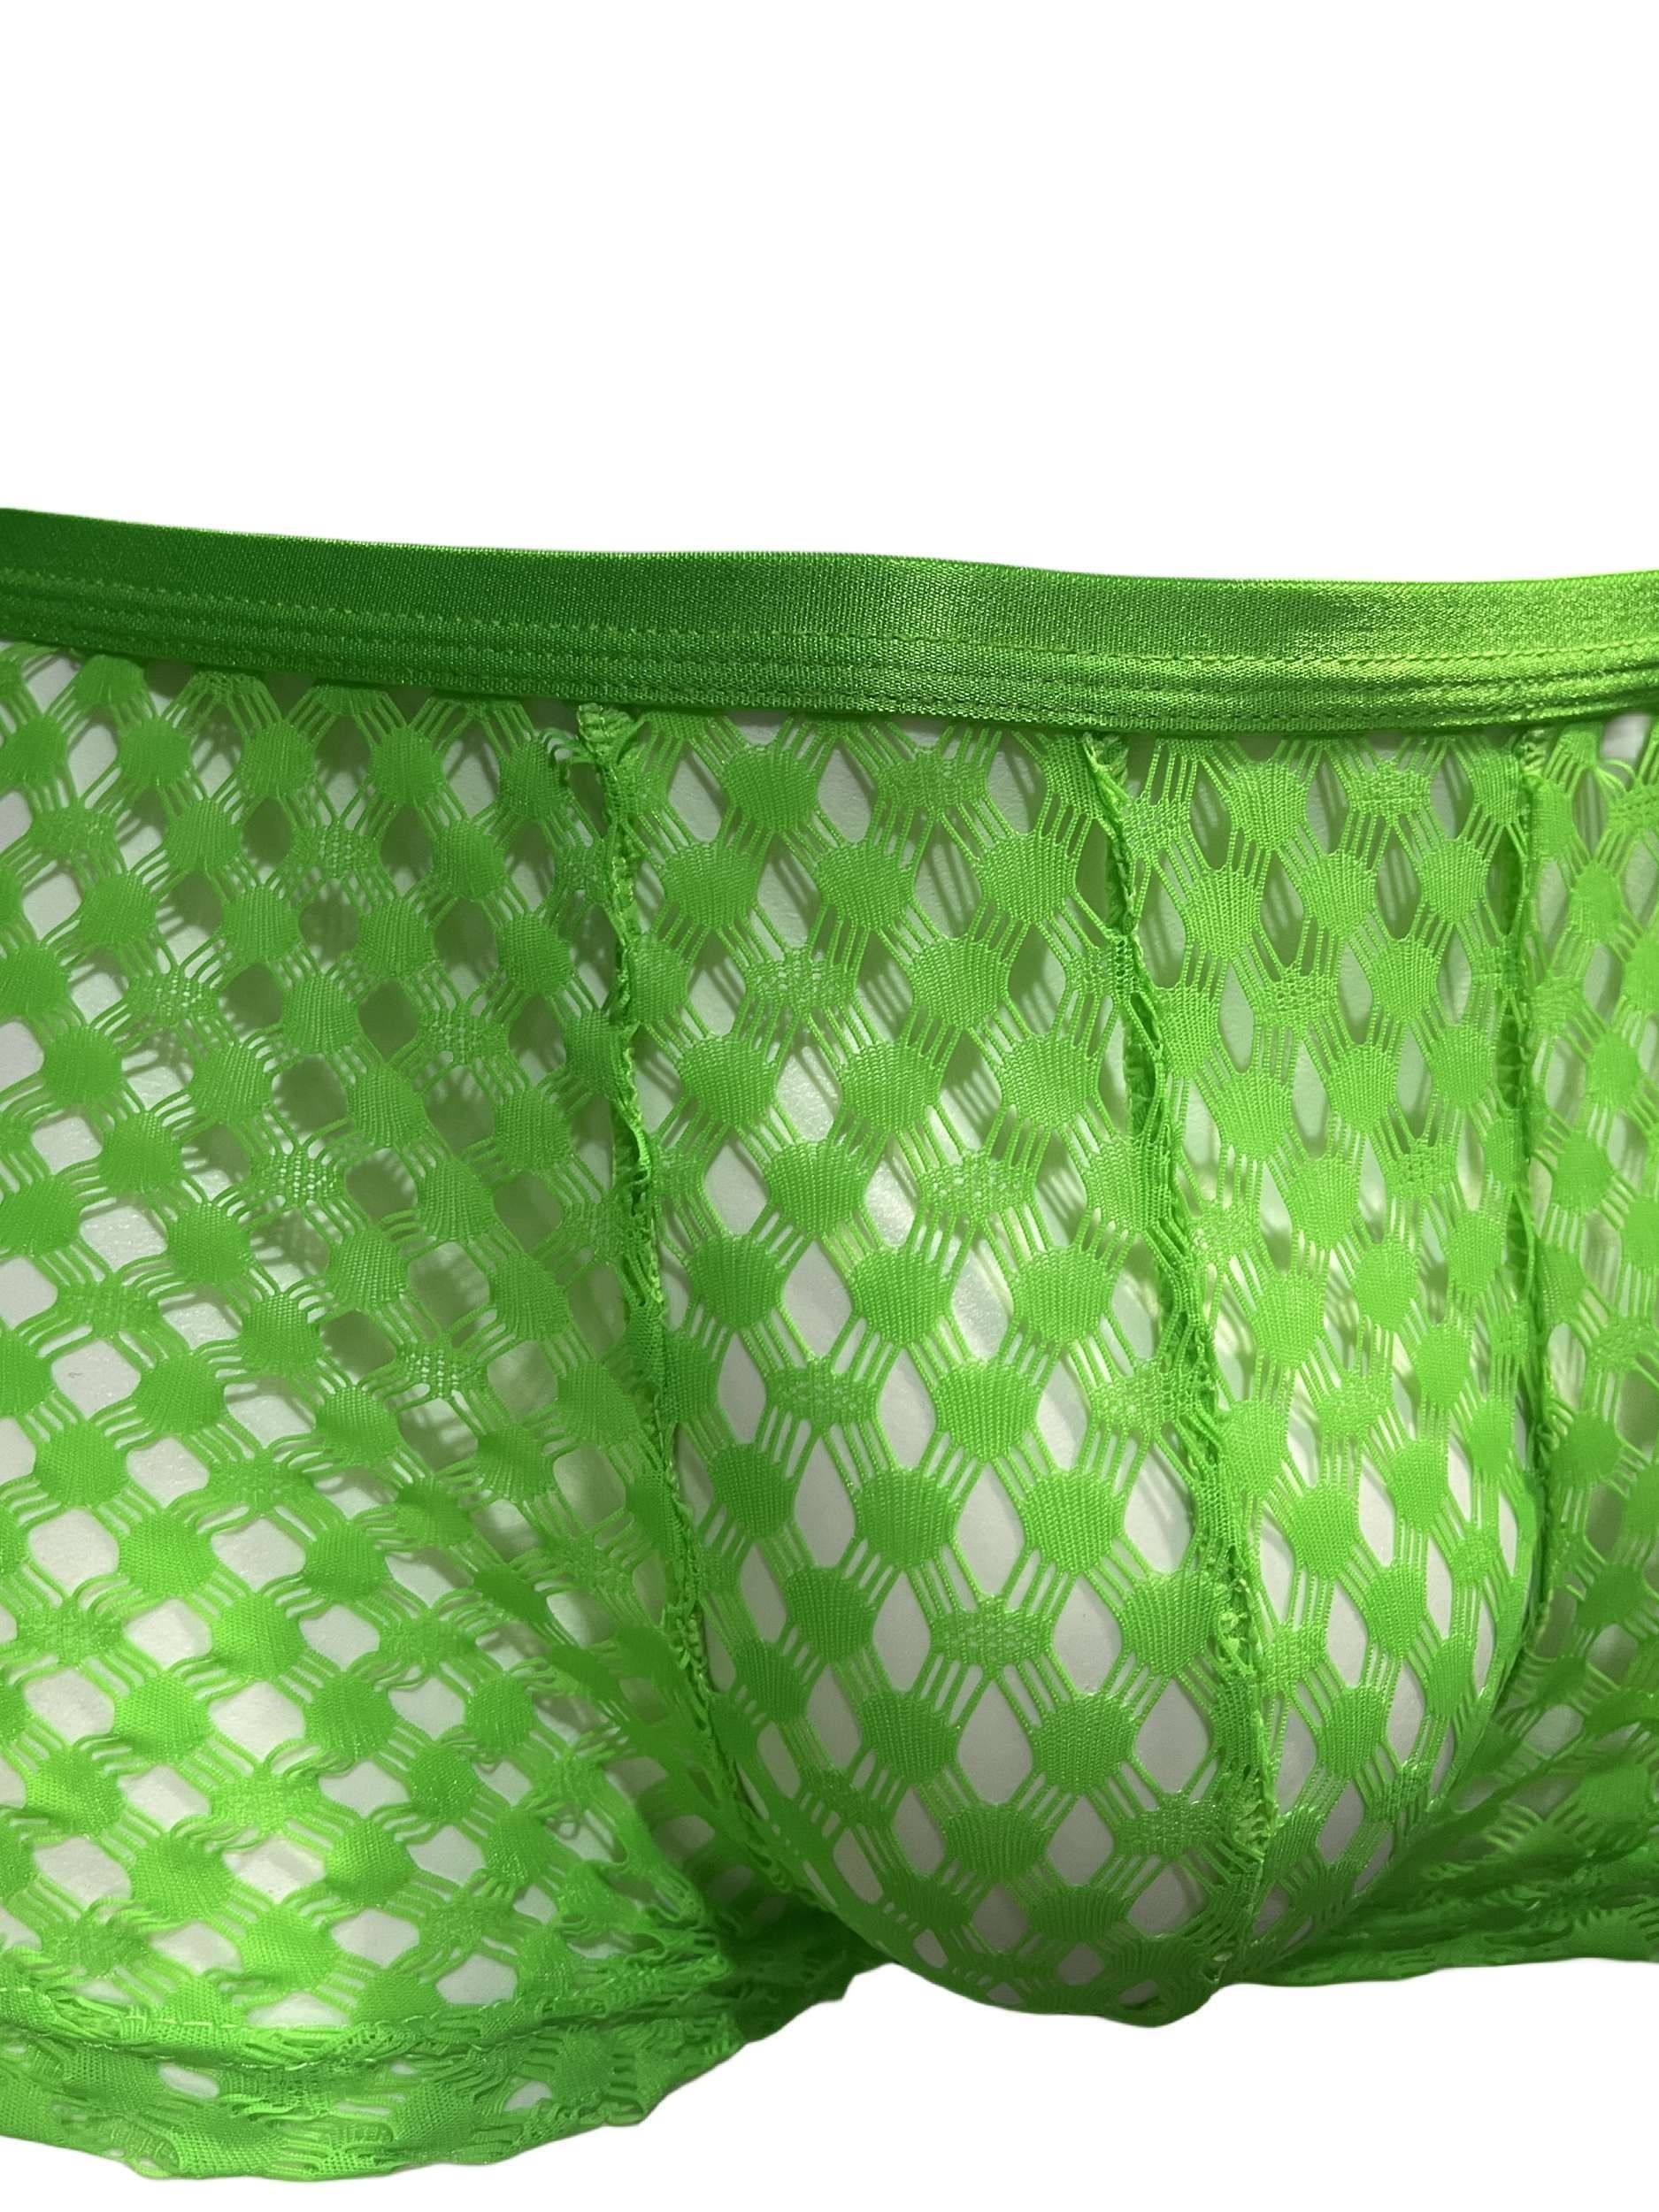 Green Frankenstein Mesh Hipster Panty – McLaineO